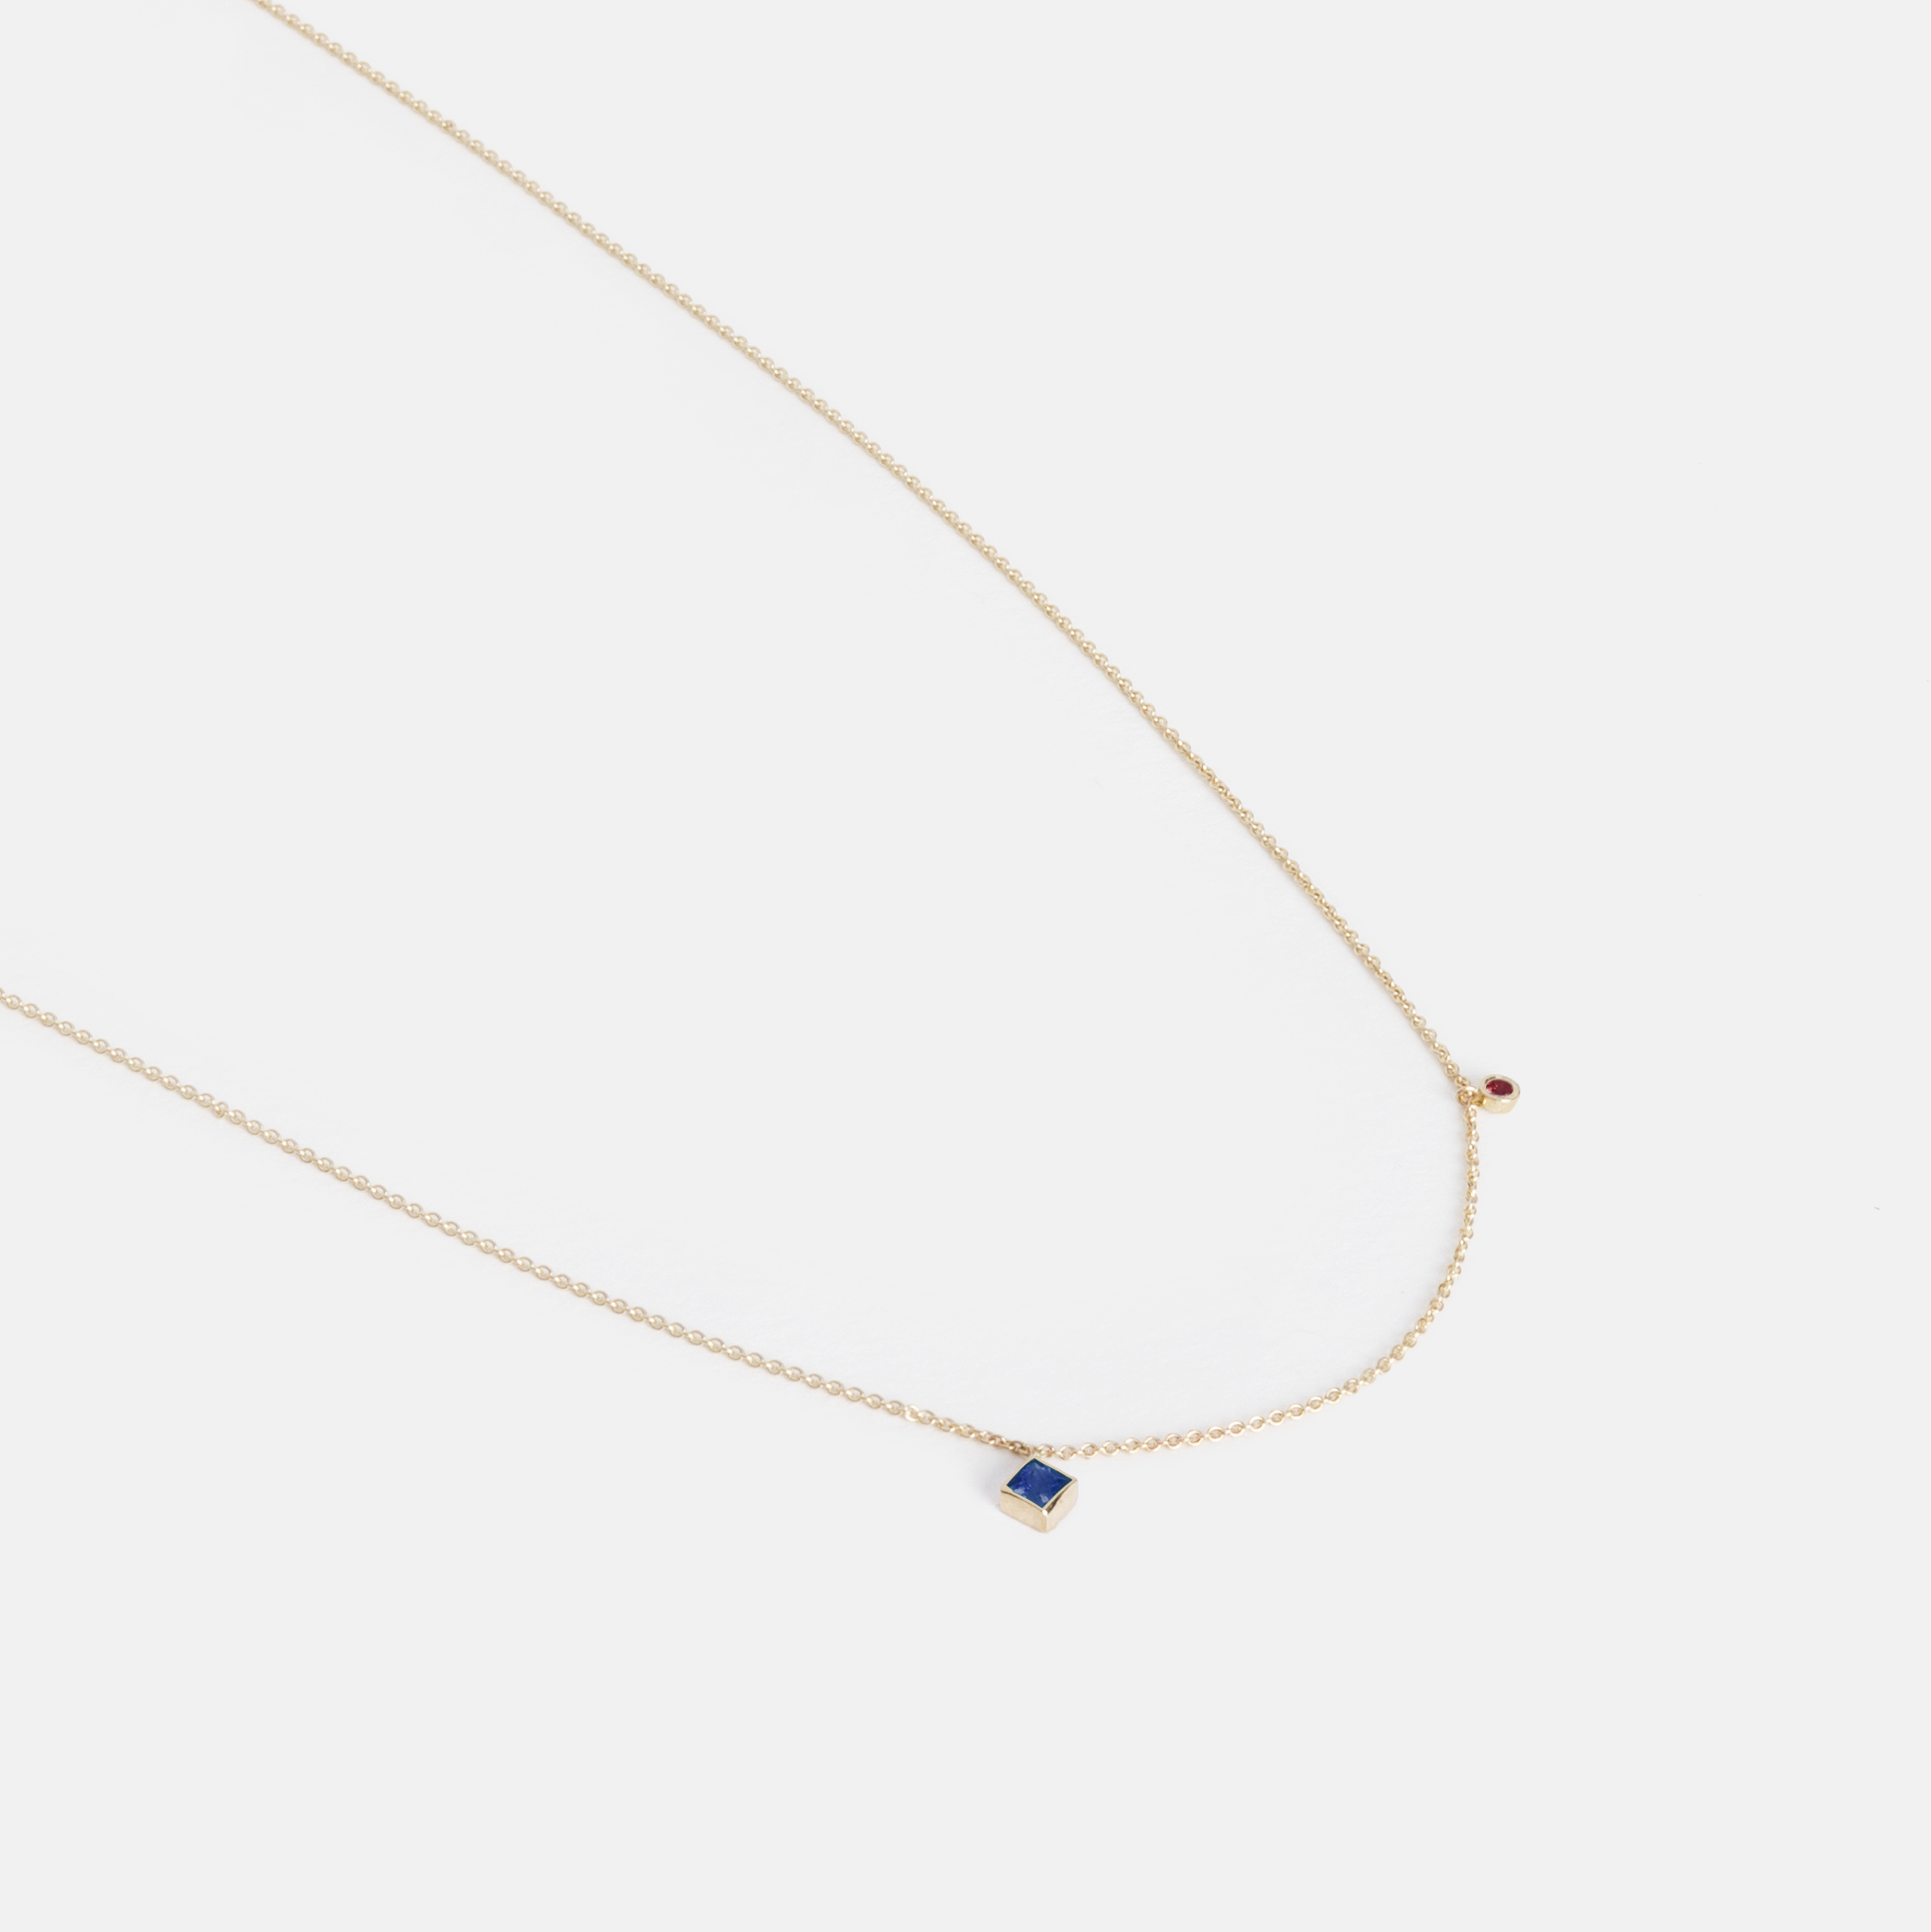 Ibi Delicate Necklace in 14k Gold set with Sapphire and Ruby By SHW Fine Jewelry NYC